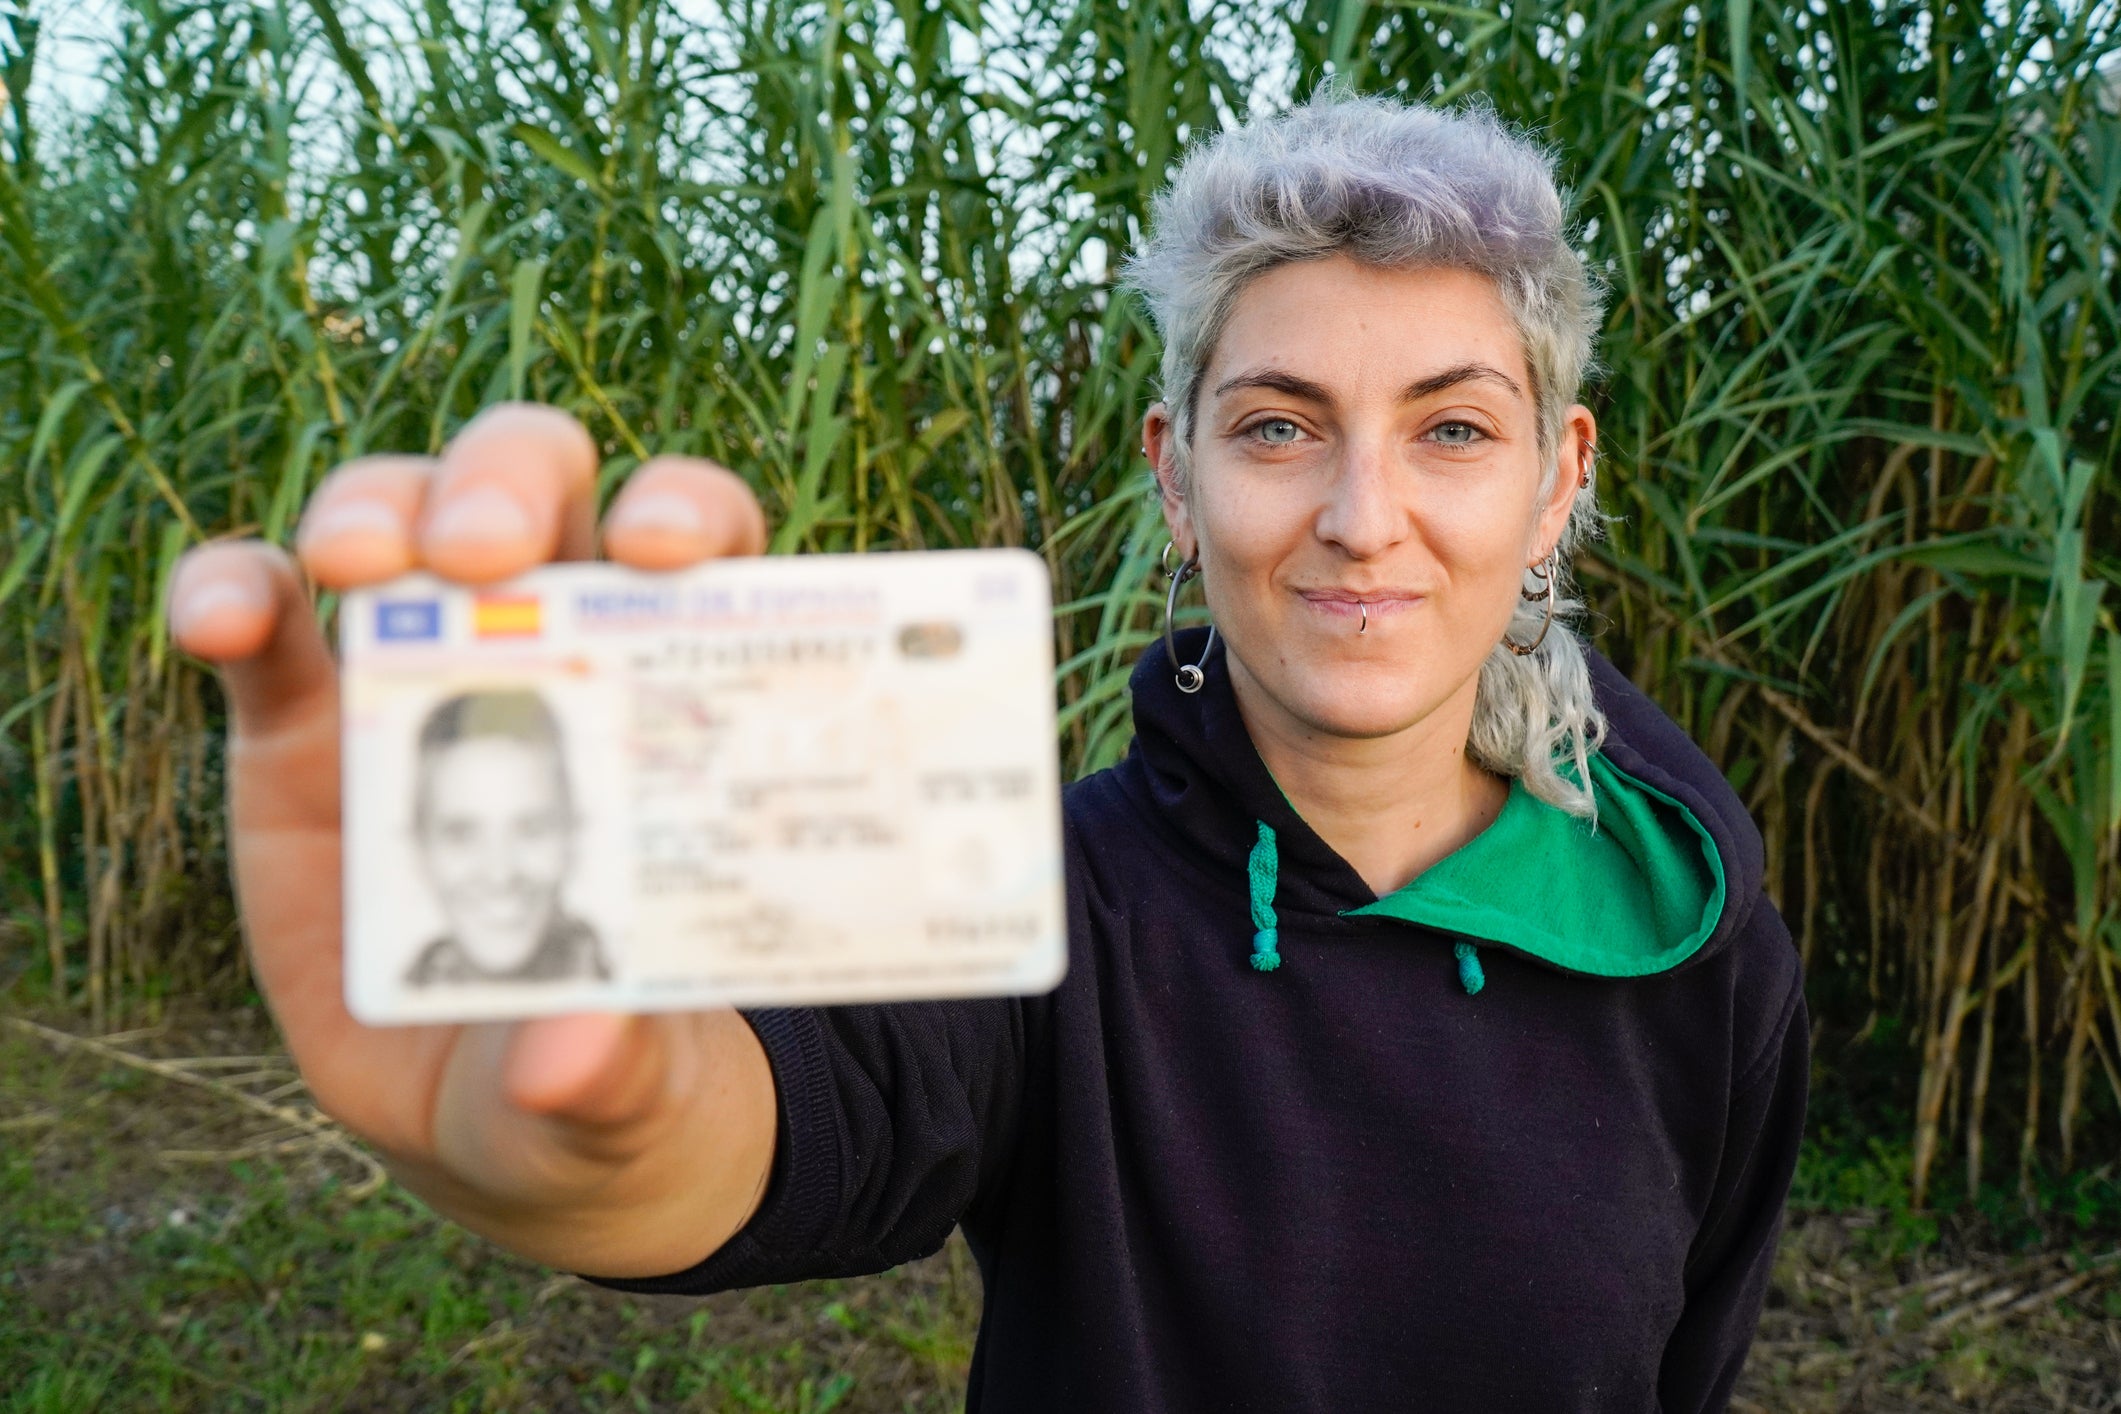 Nations with open border policies, such as the Schengen group in the EU, have required identity cards now for years